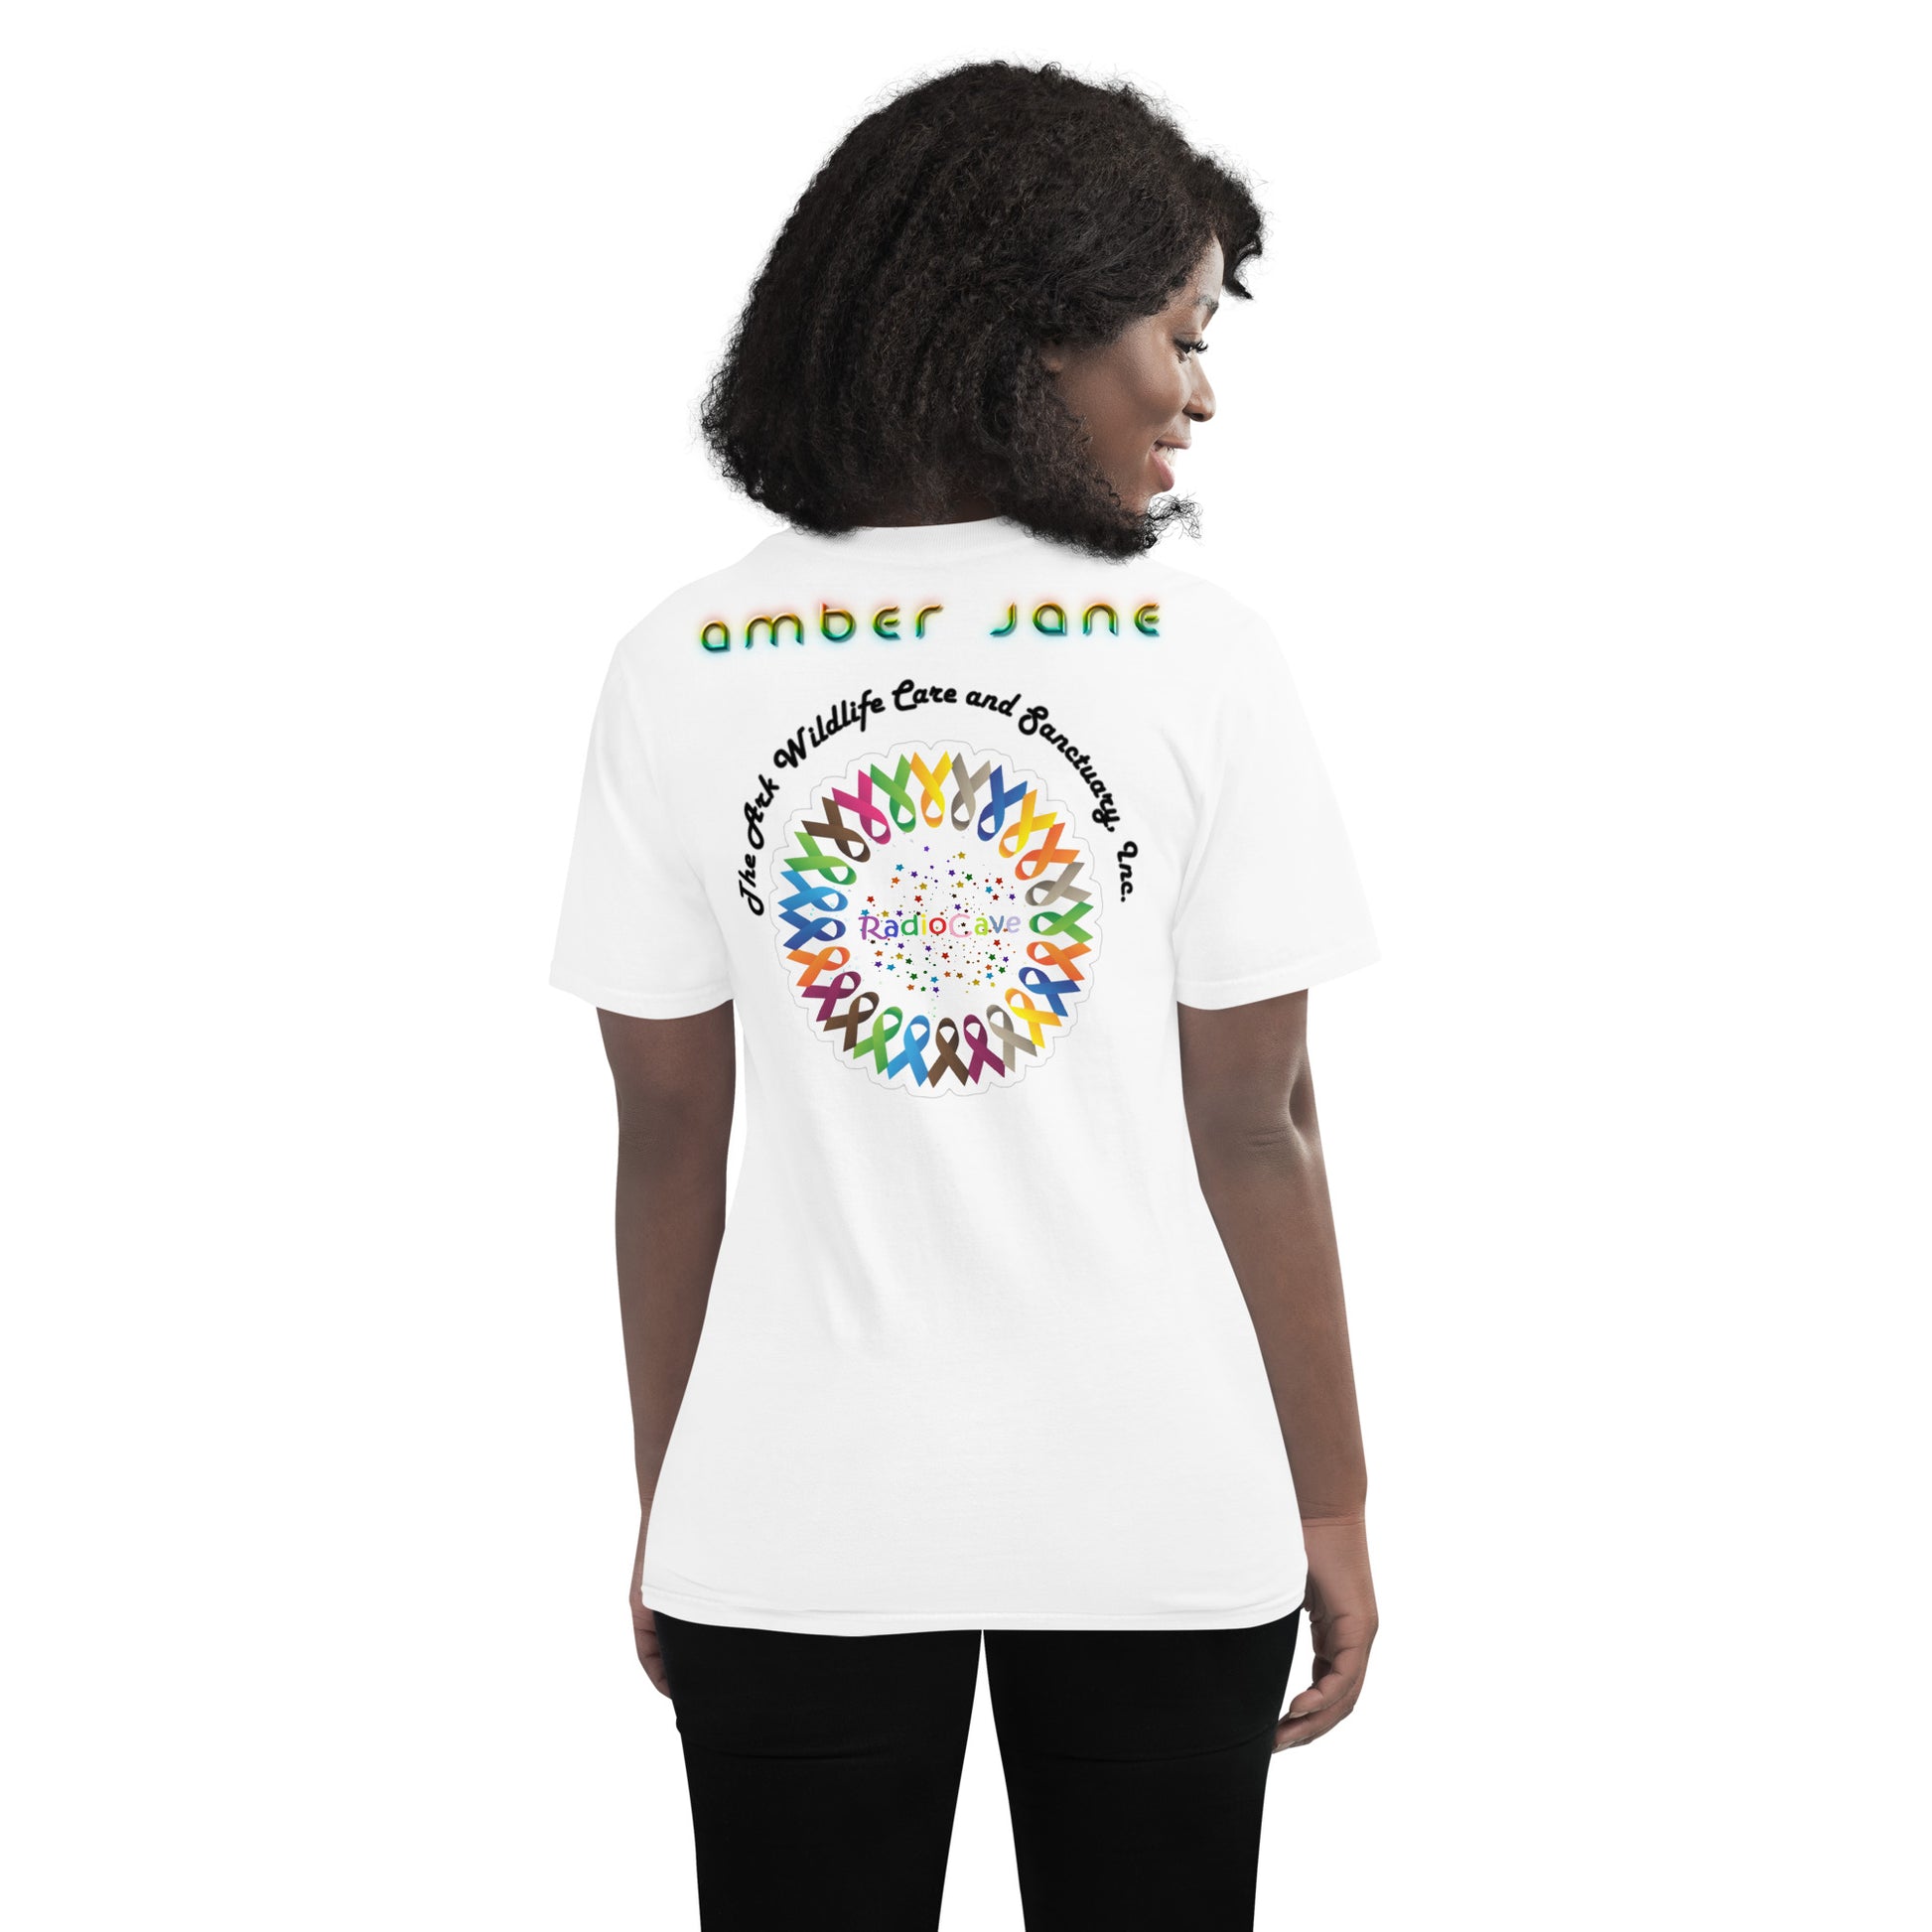 Earthdance 2023 - Amber Jane v1 - Limited Edition - Short-Sleeve T-Shirt - The Foundation of Families